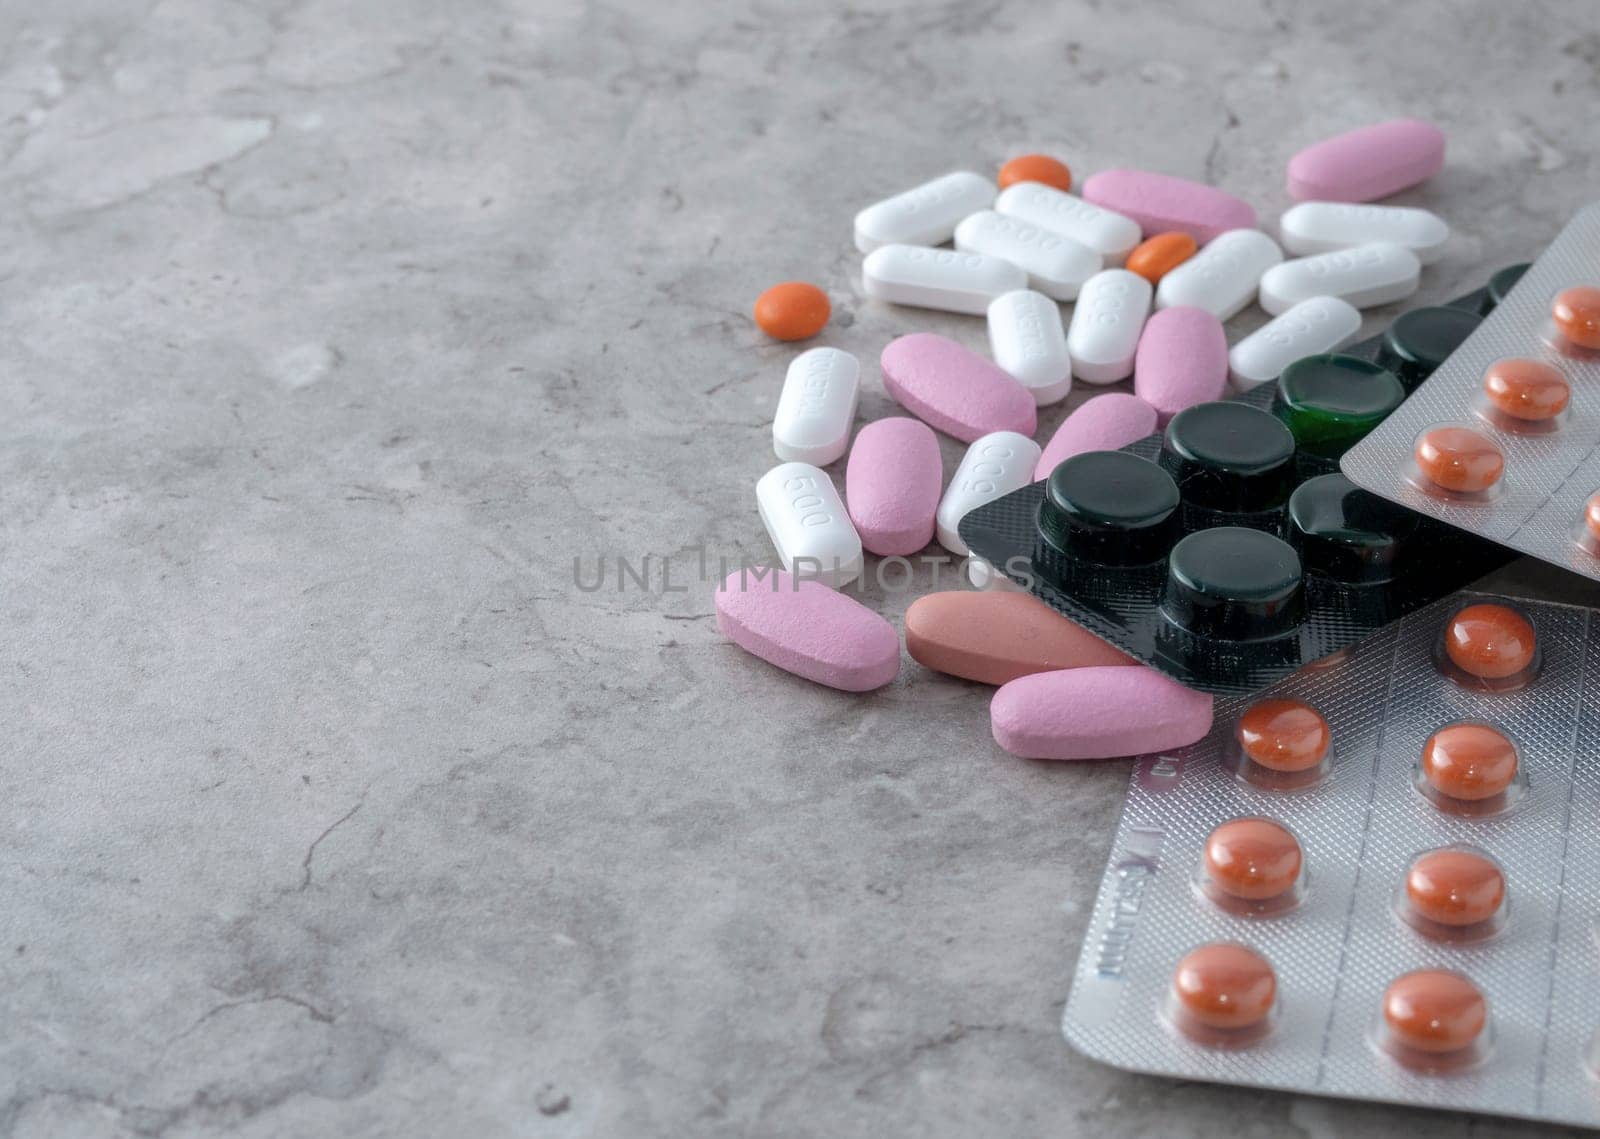 multicolored medical pills and packs of pills on a table.